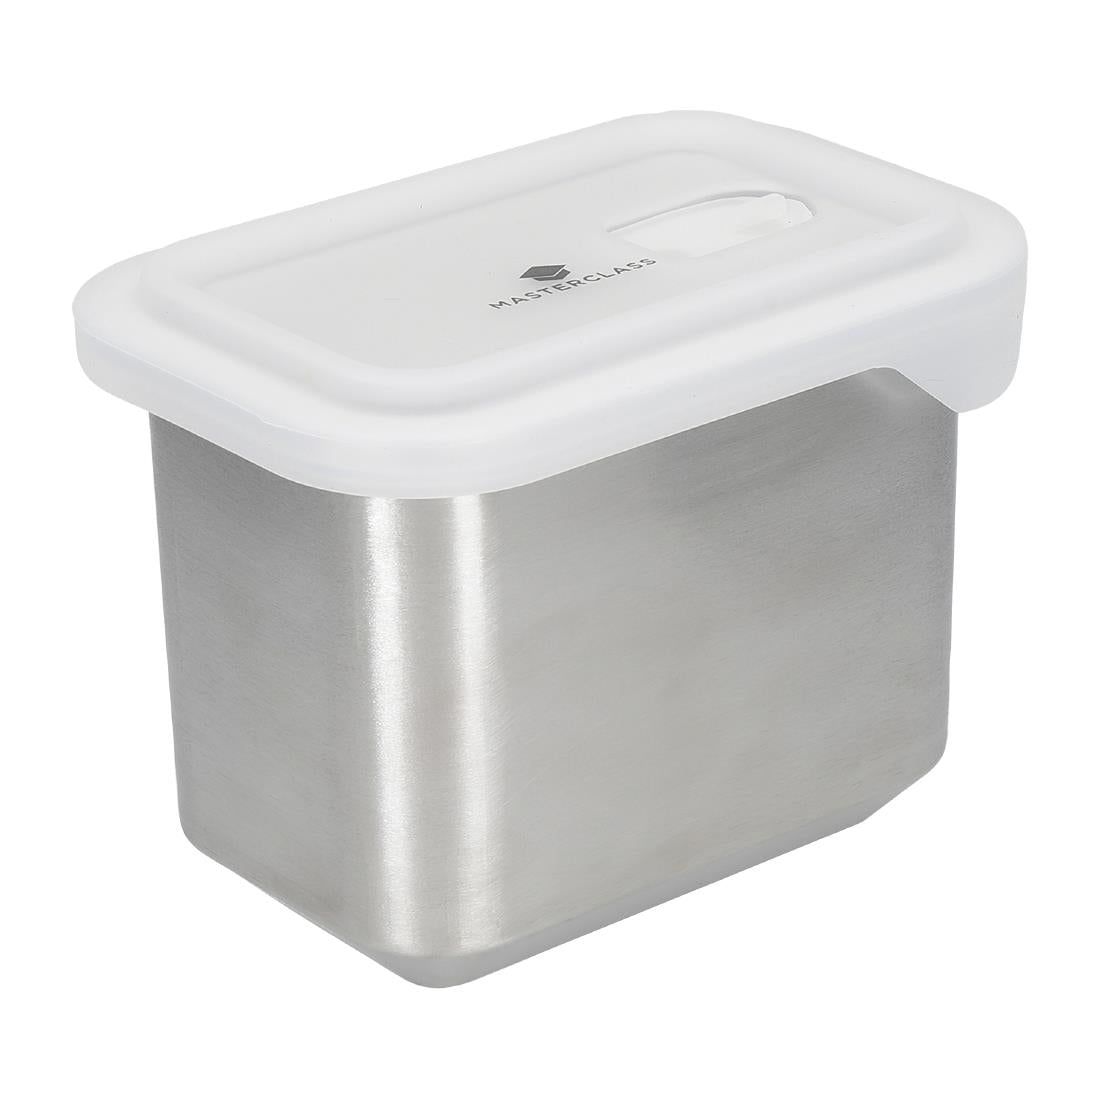 FW785 Masterclass All-in-One Stainless Steel Food Storage Dish 1Ltr JD Catering Equipment Solutions Ltd